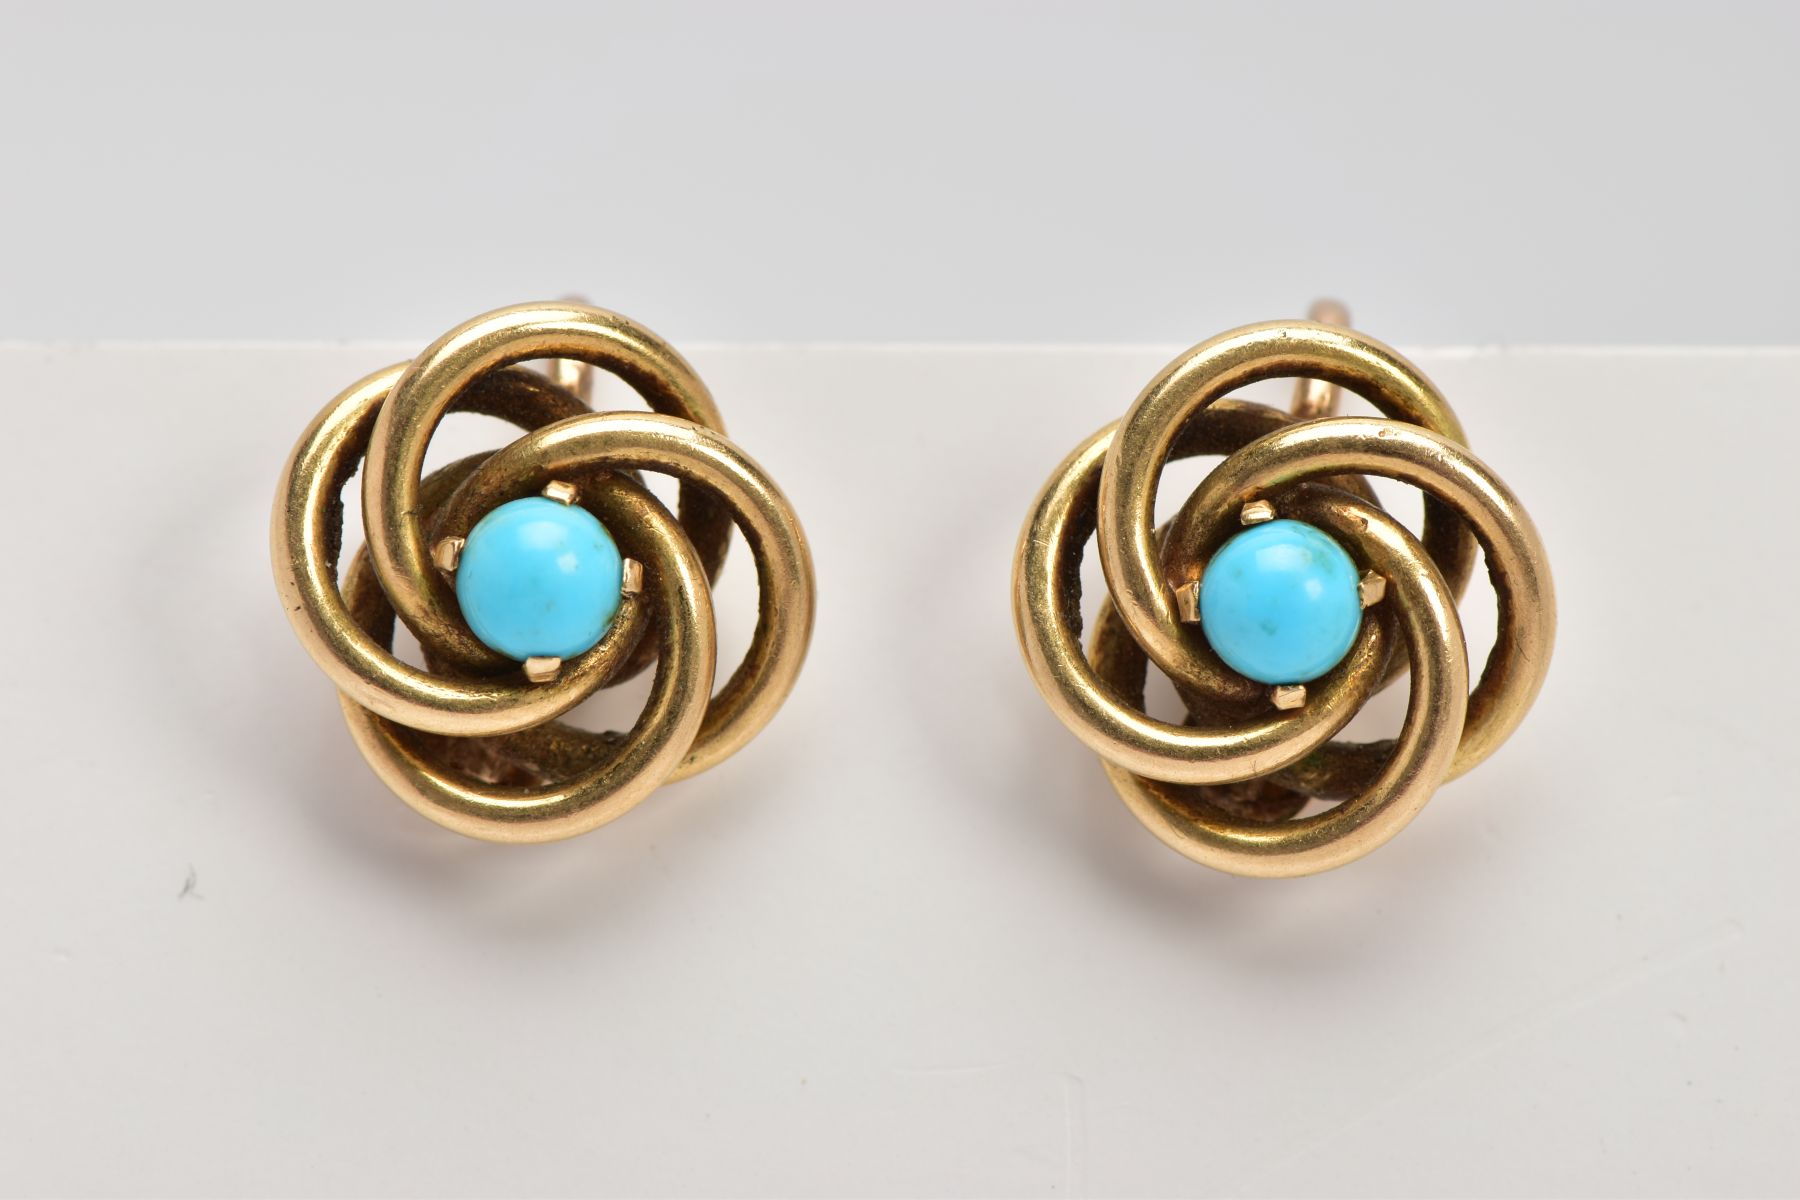 A PAIR OF EARRINGS, of interlocking circular design each set with a central turquoise cabochon, with - Image 2 of 3